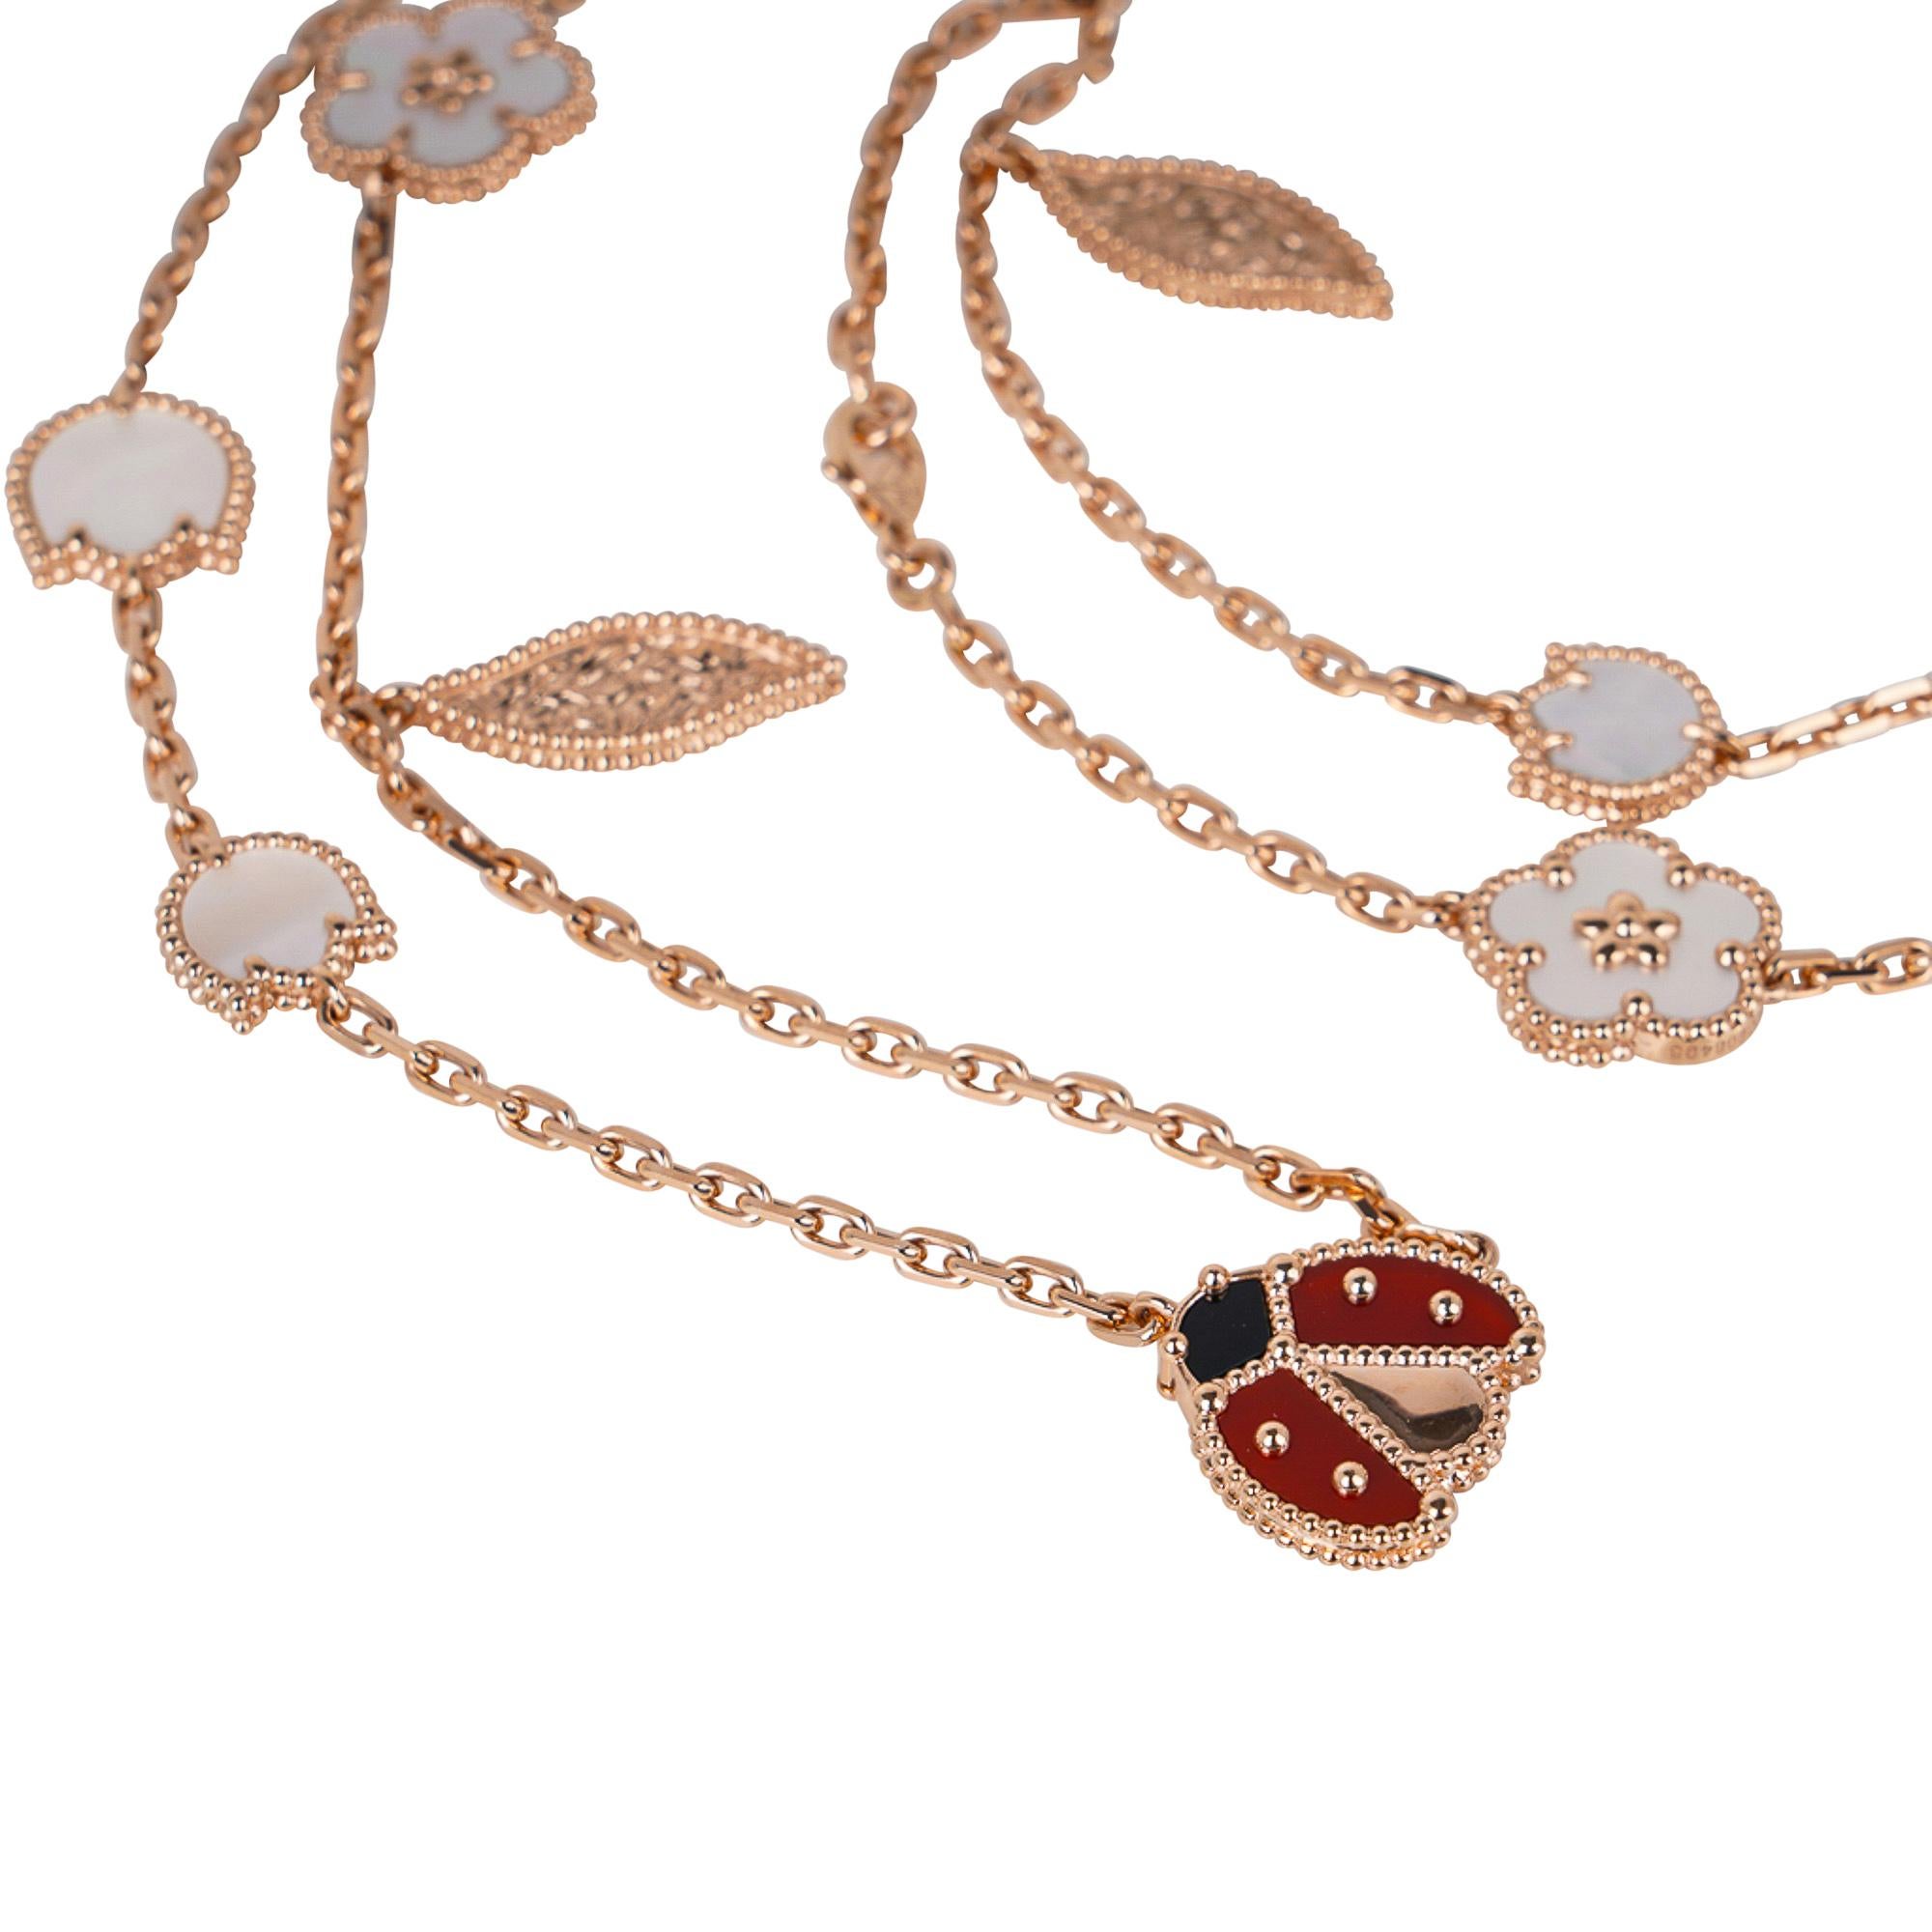 Guaranteed authentic collectible Van Cleef & Arpels Lucky Spring long 15 Motif necklace.
Happy ladybugs, flower and leaf motifs features the Beauty and Hope of Spring.
Set in 18K Rose Gold with Carnelian, Onyx and Mother of Pearl.
Signature stamps